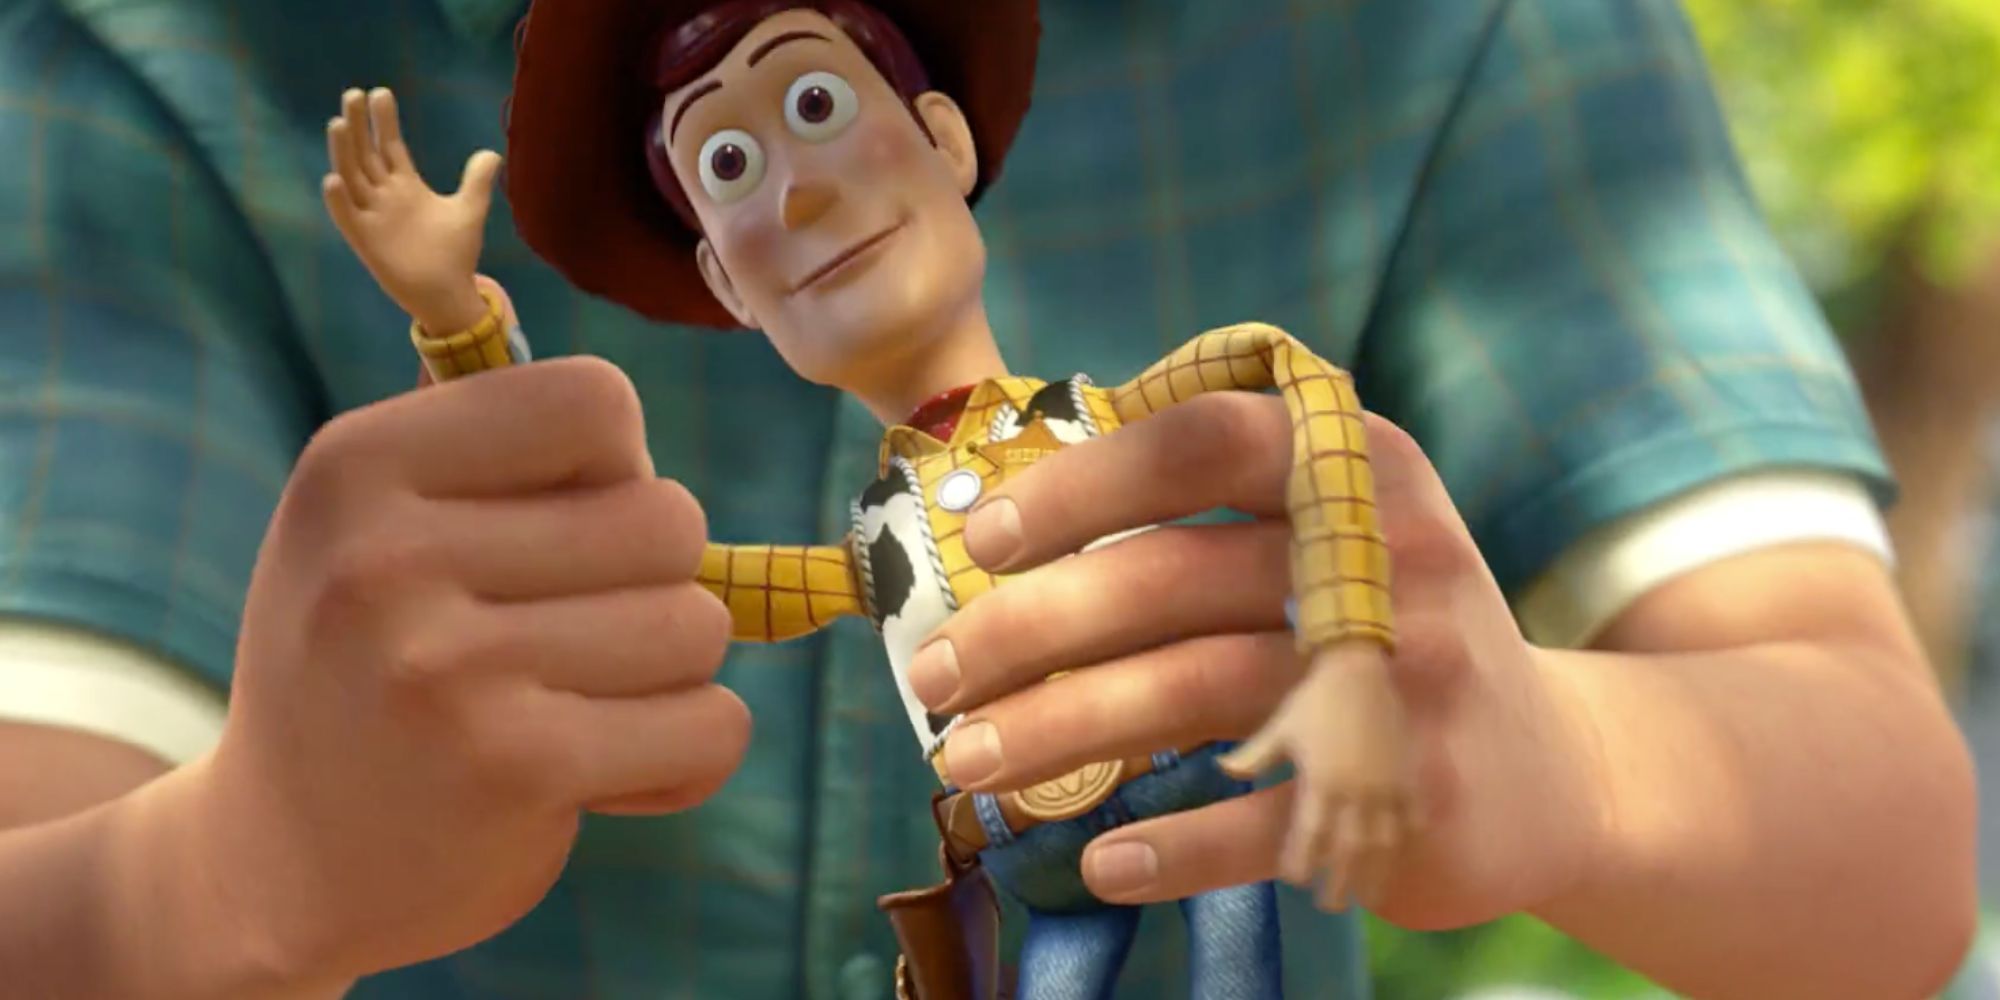 Woody being made to wave goodbye by Andy in Toy Story 3